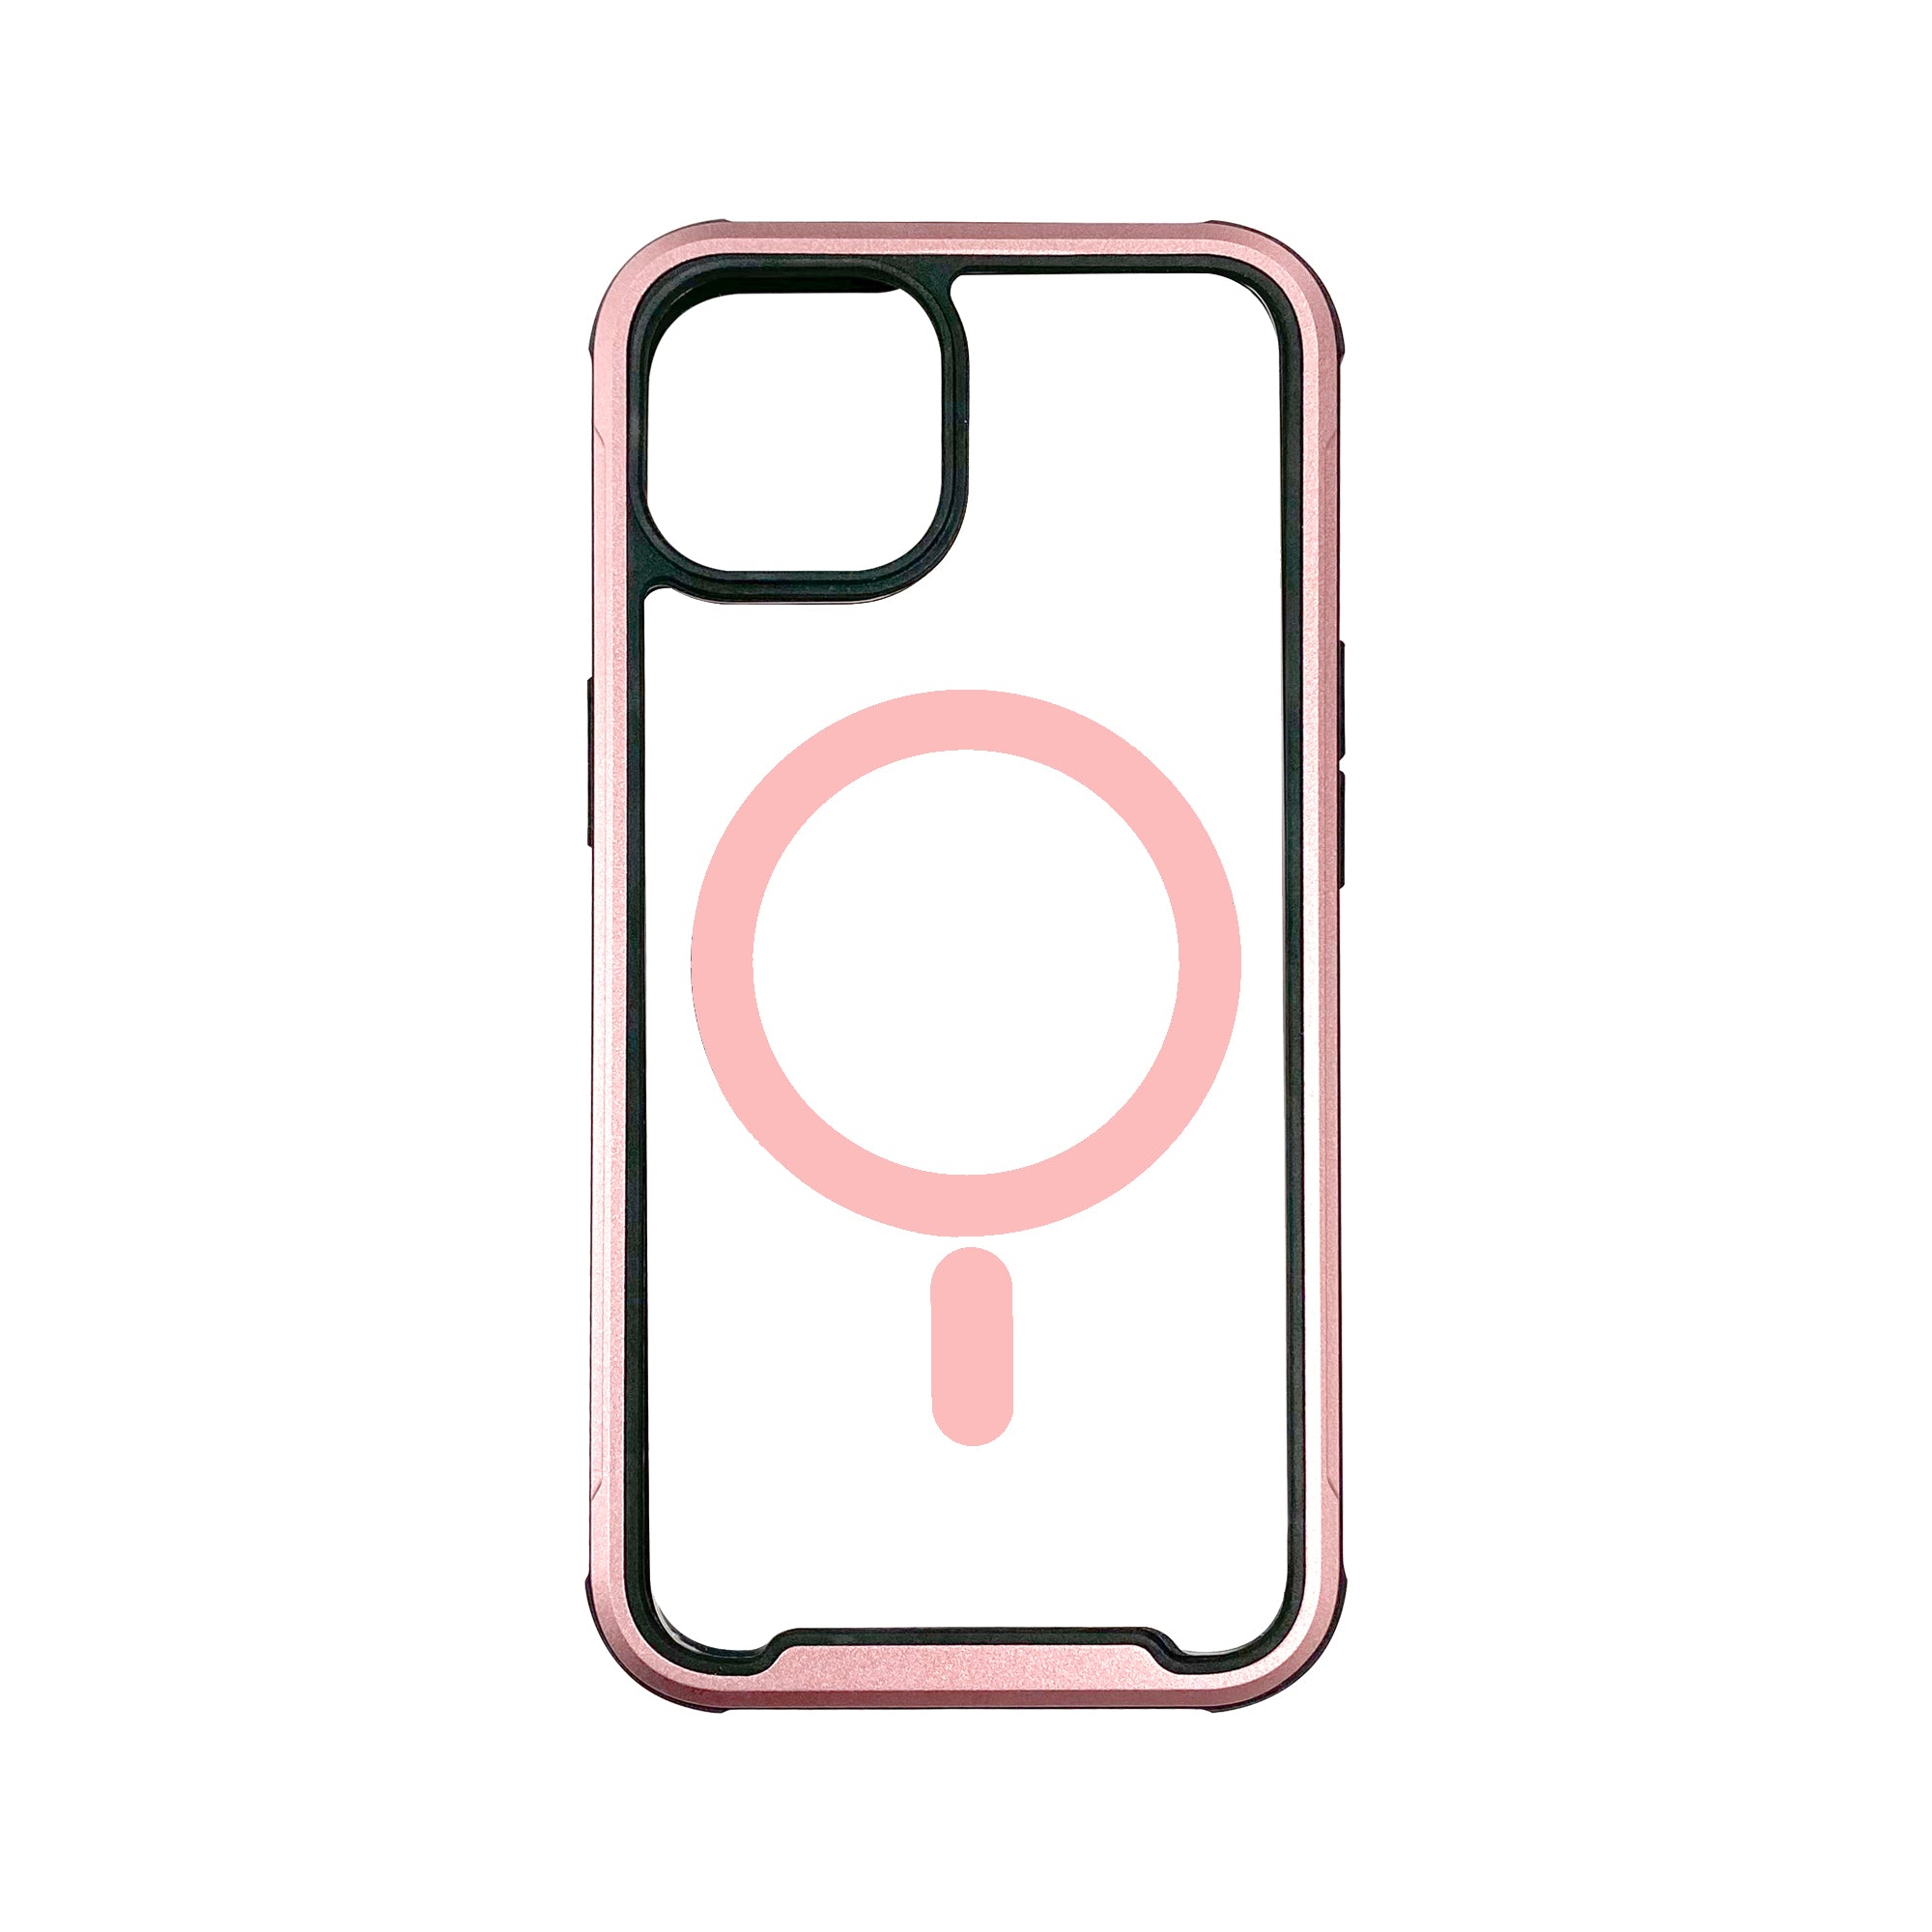 An Urban Edge Case iPhone 14 Series phone case with a built-in magnifying glass for extra protection.